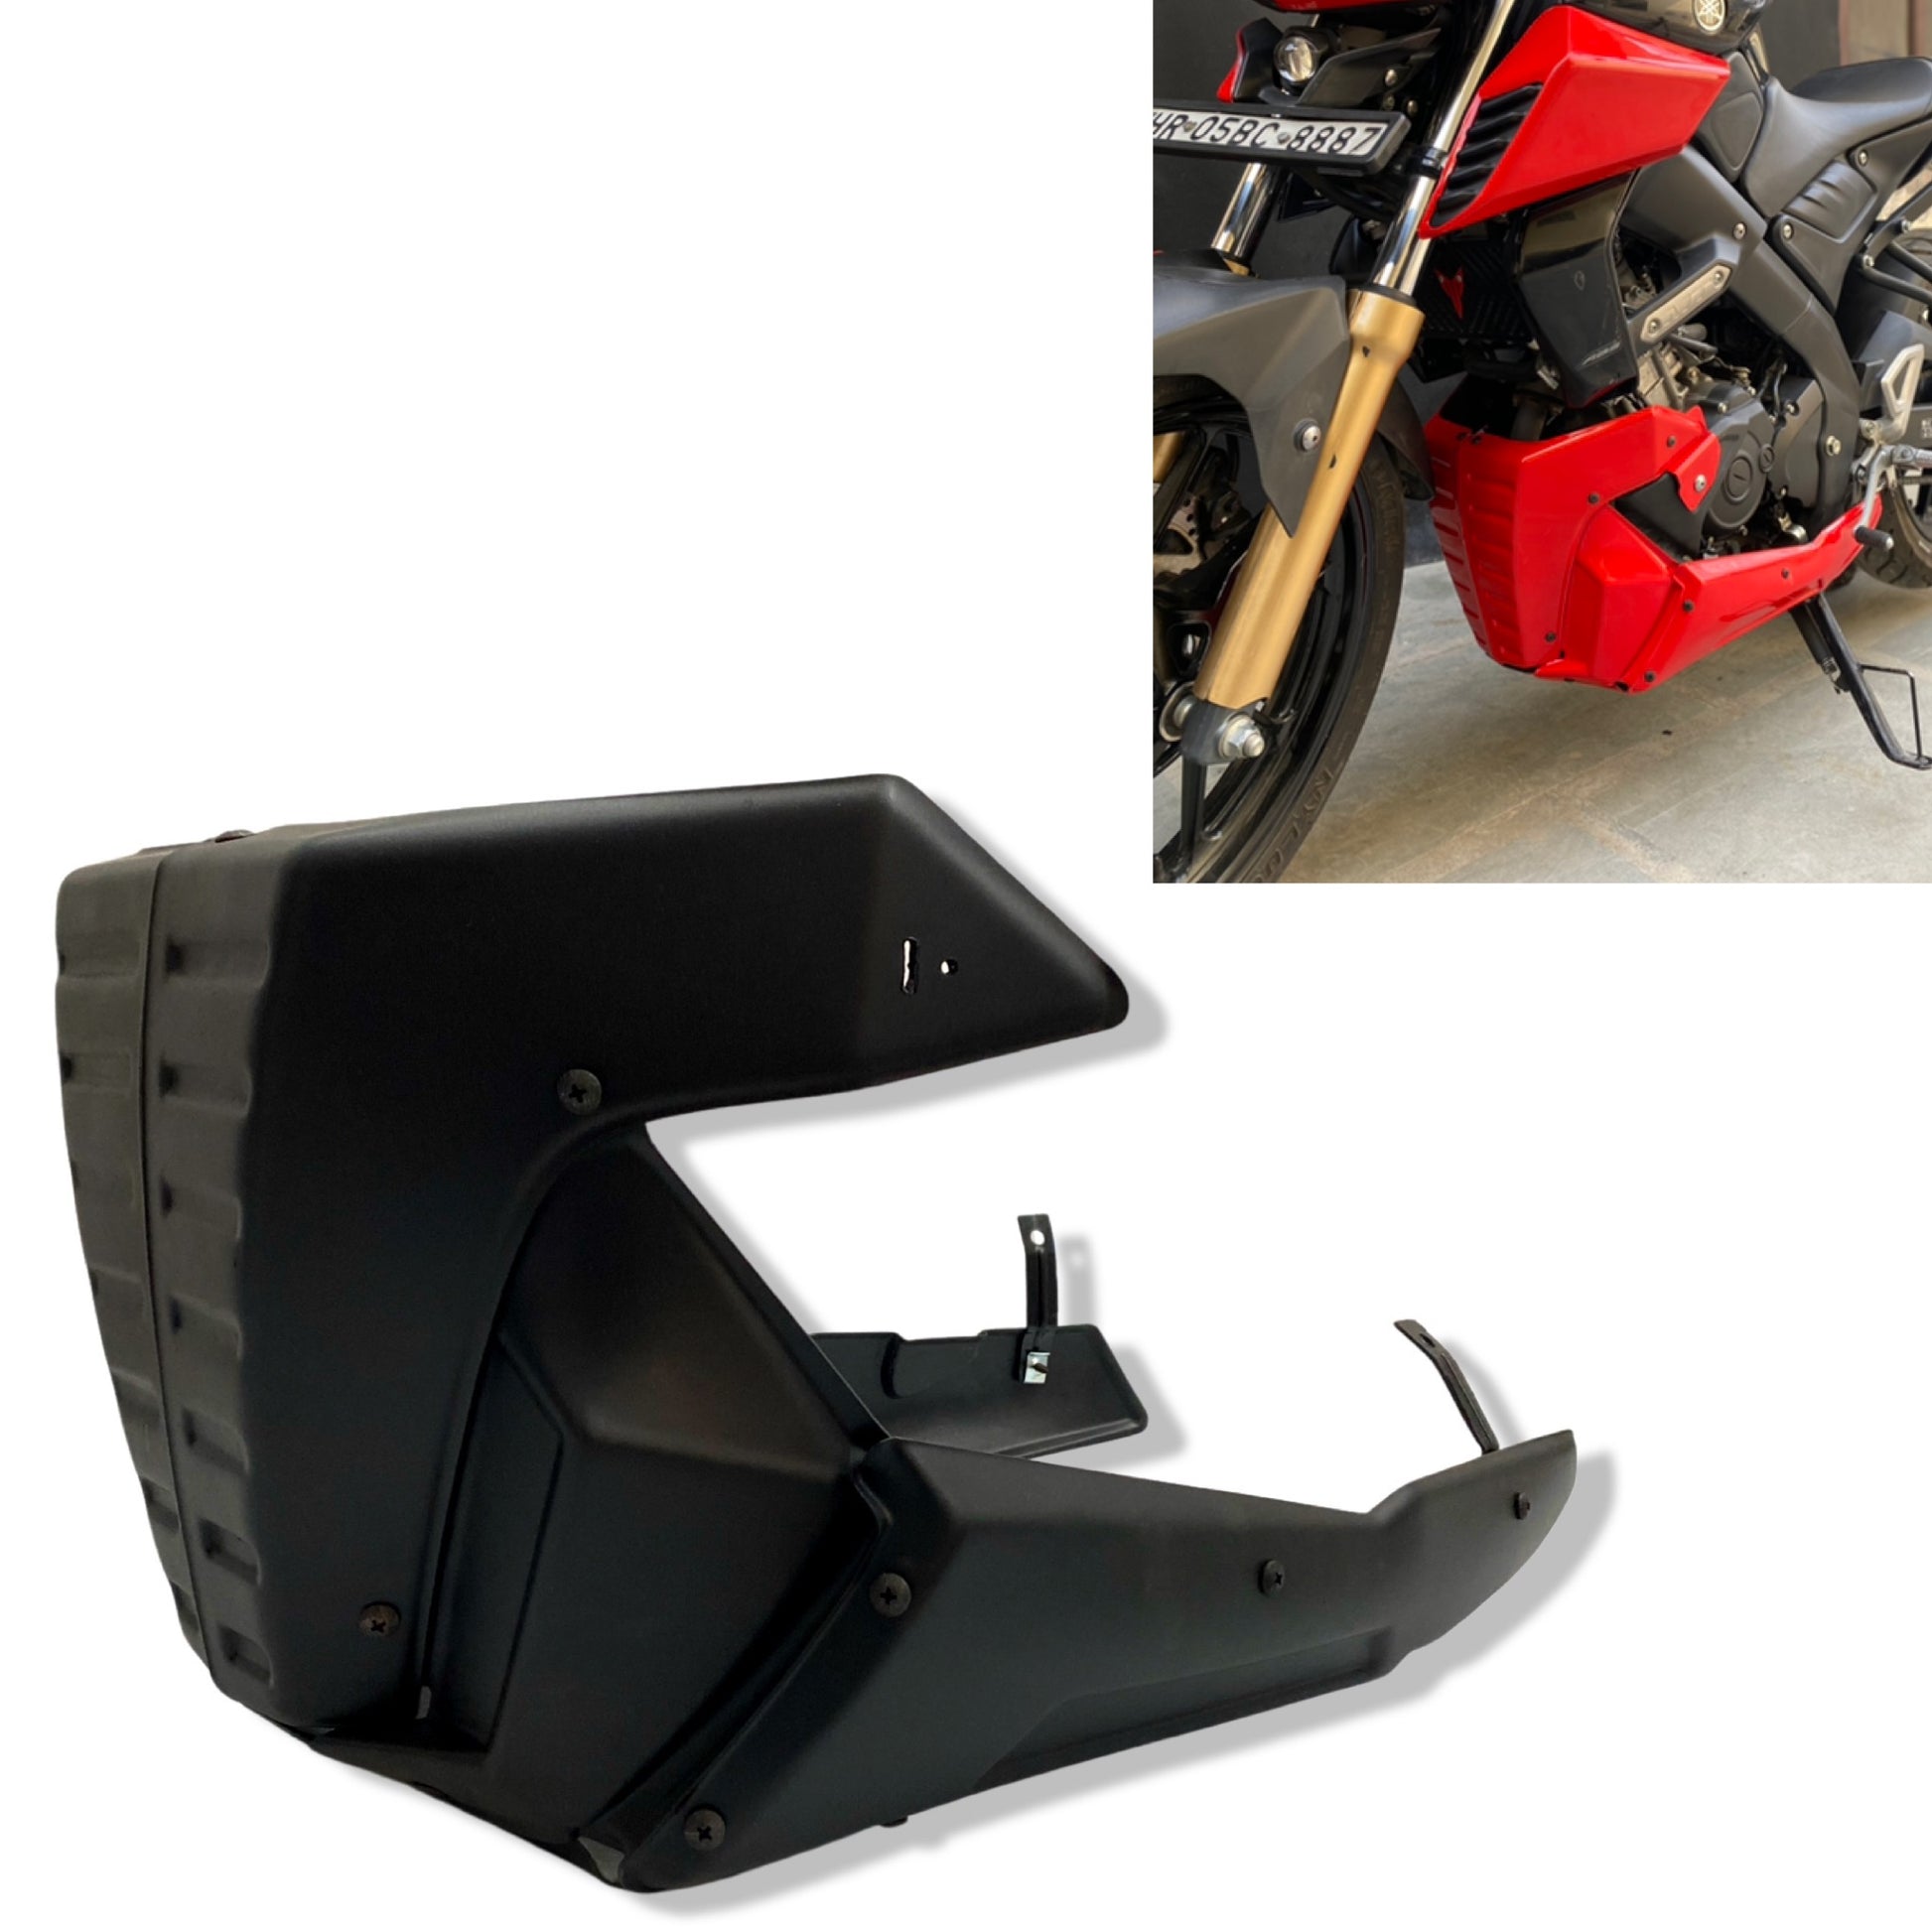 Yamaha MT15 Accessories | Modified Yamaha MT 15 | Best MT15 Modification | Underbelly for Yamaha MT15 | Saiga Parts for MT15 V1 / V2